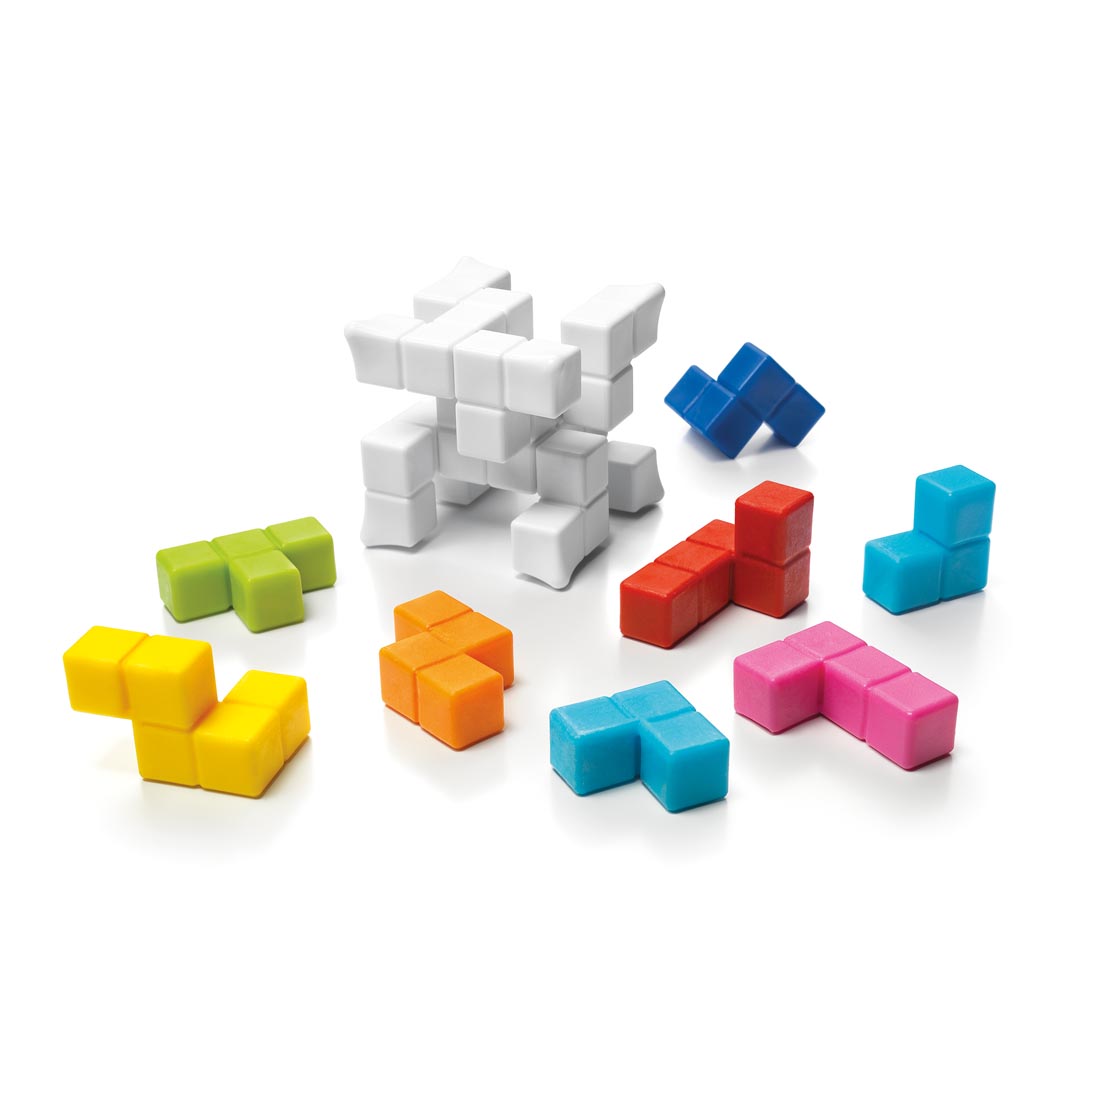 Plug & Play Puzzler Pieces by Smart Games